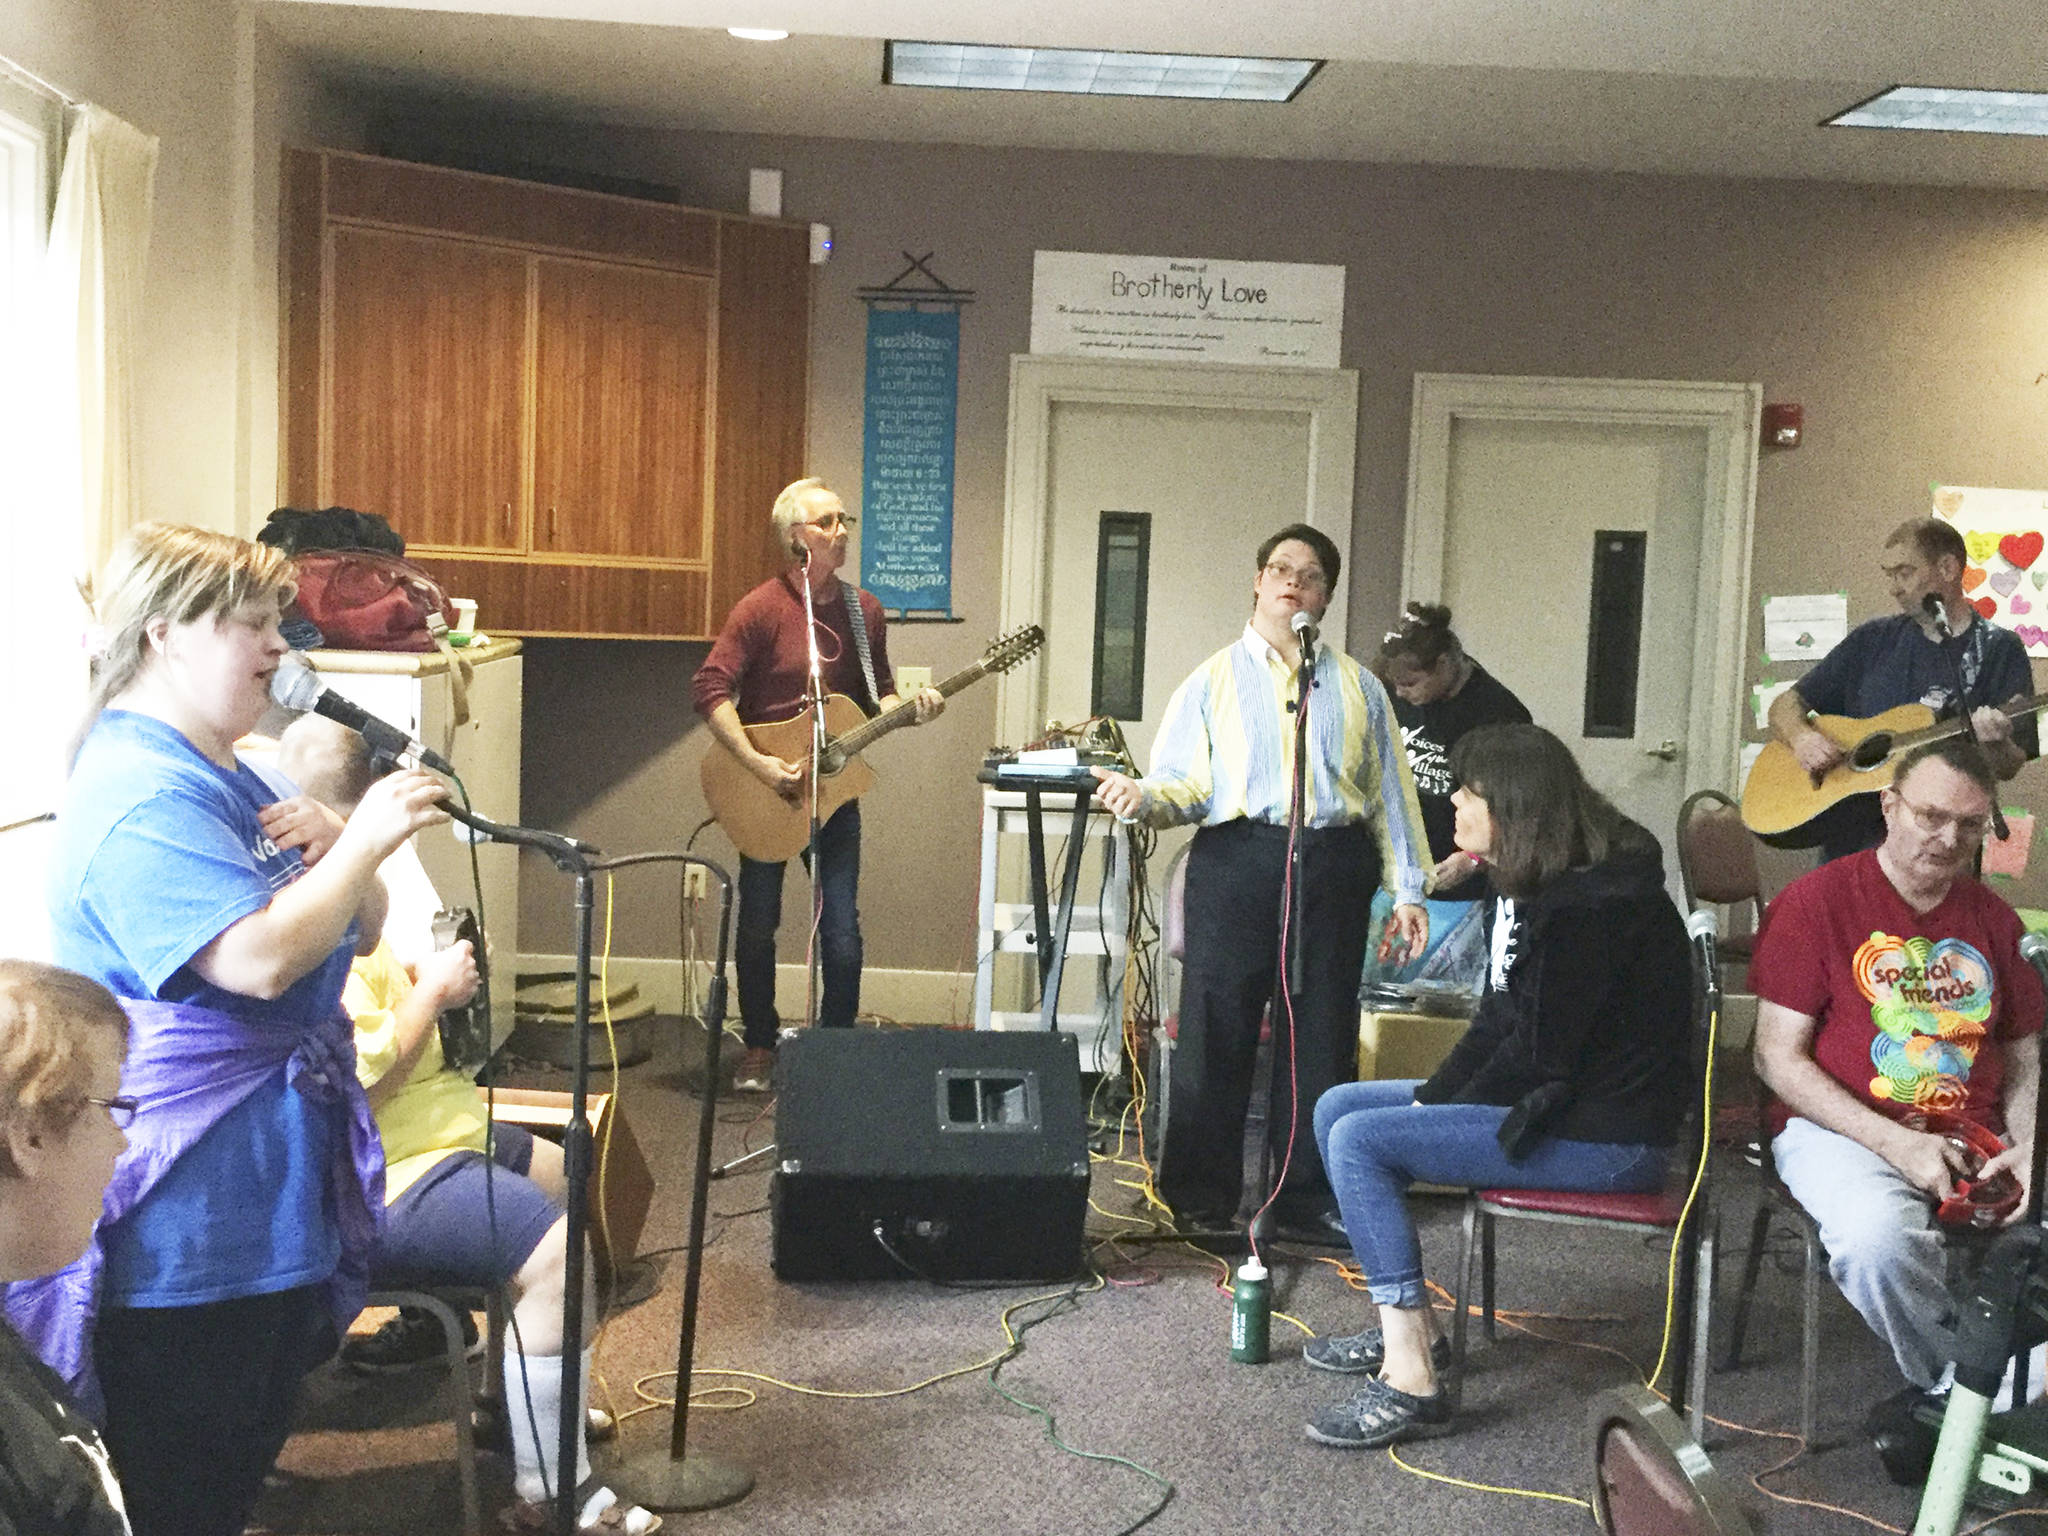 Voices of the Village bandmates with disabilities feel the star power with music